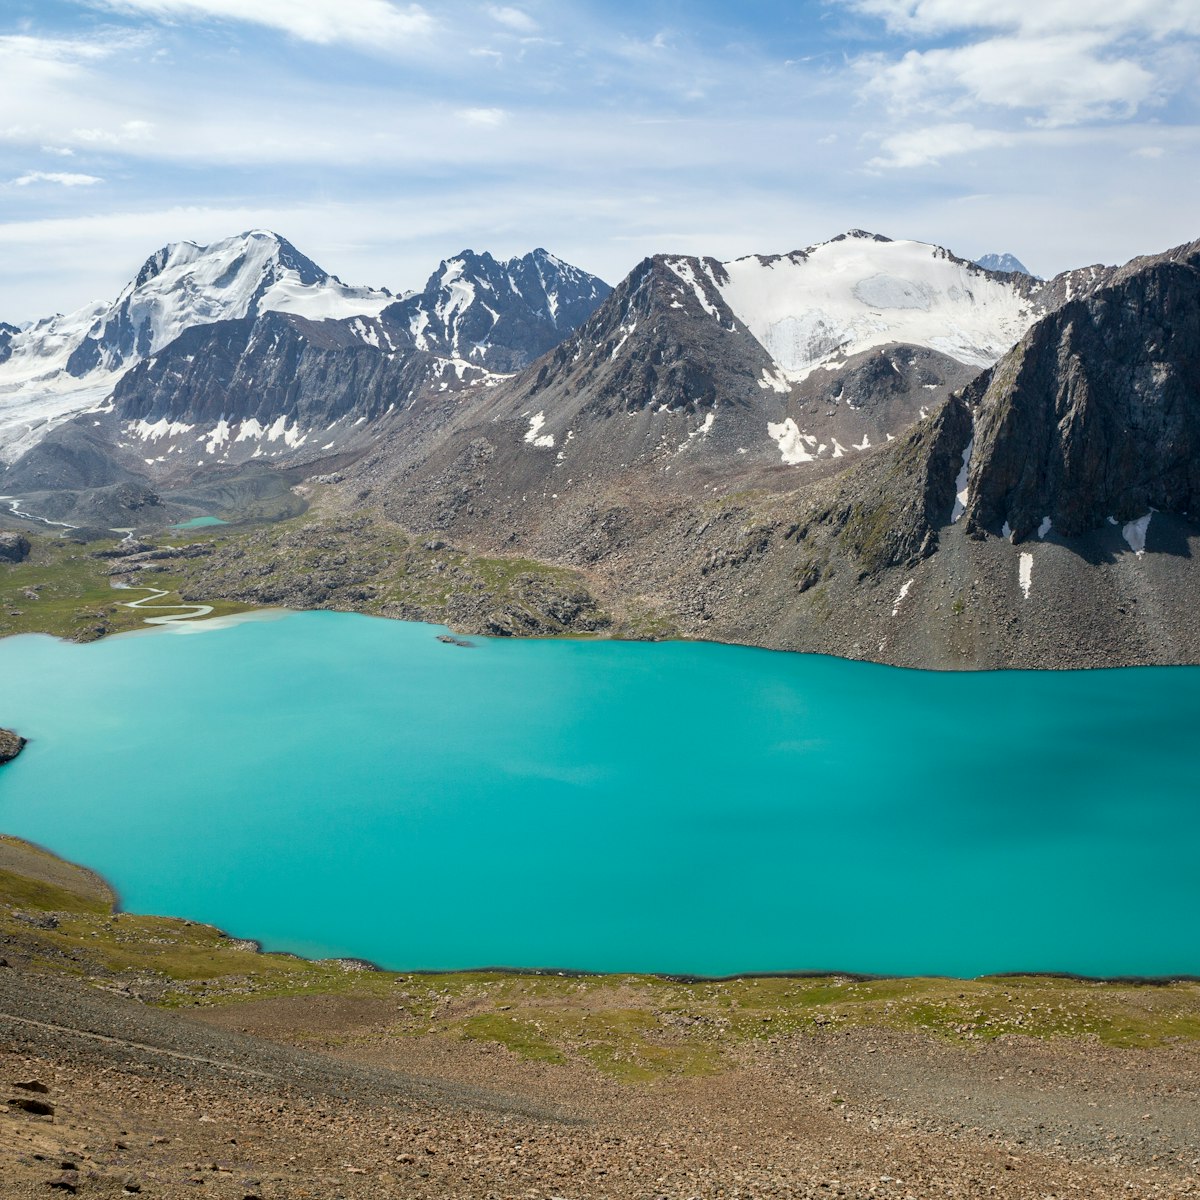 Ala-Kul lake and snow-capped mountains in Kyrgyzstan.
